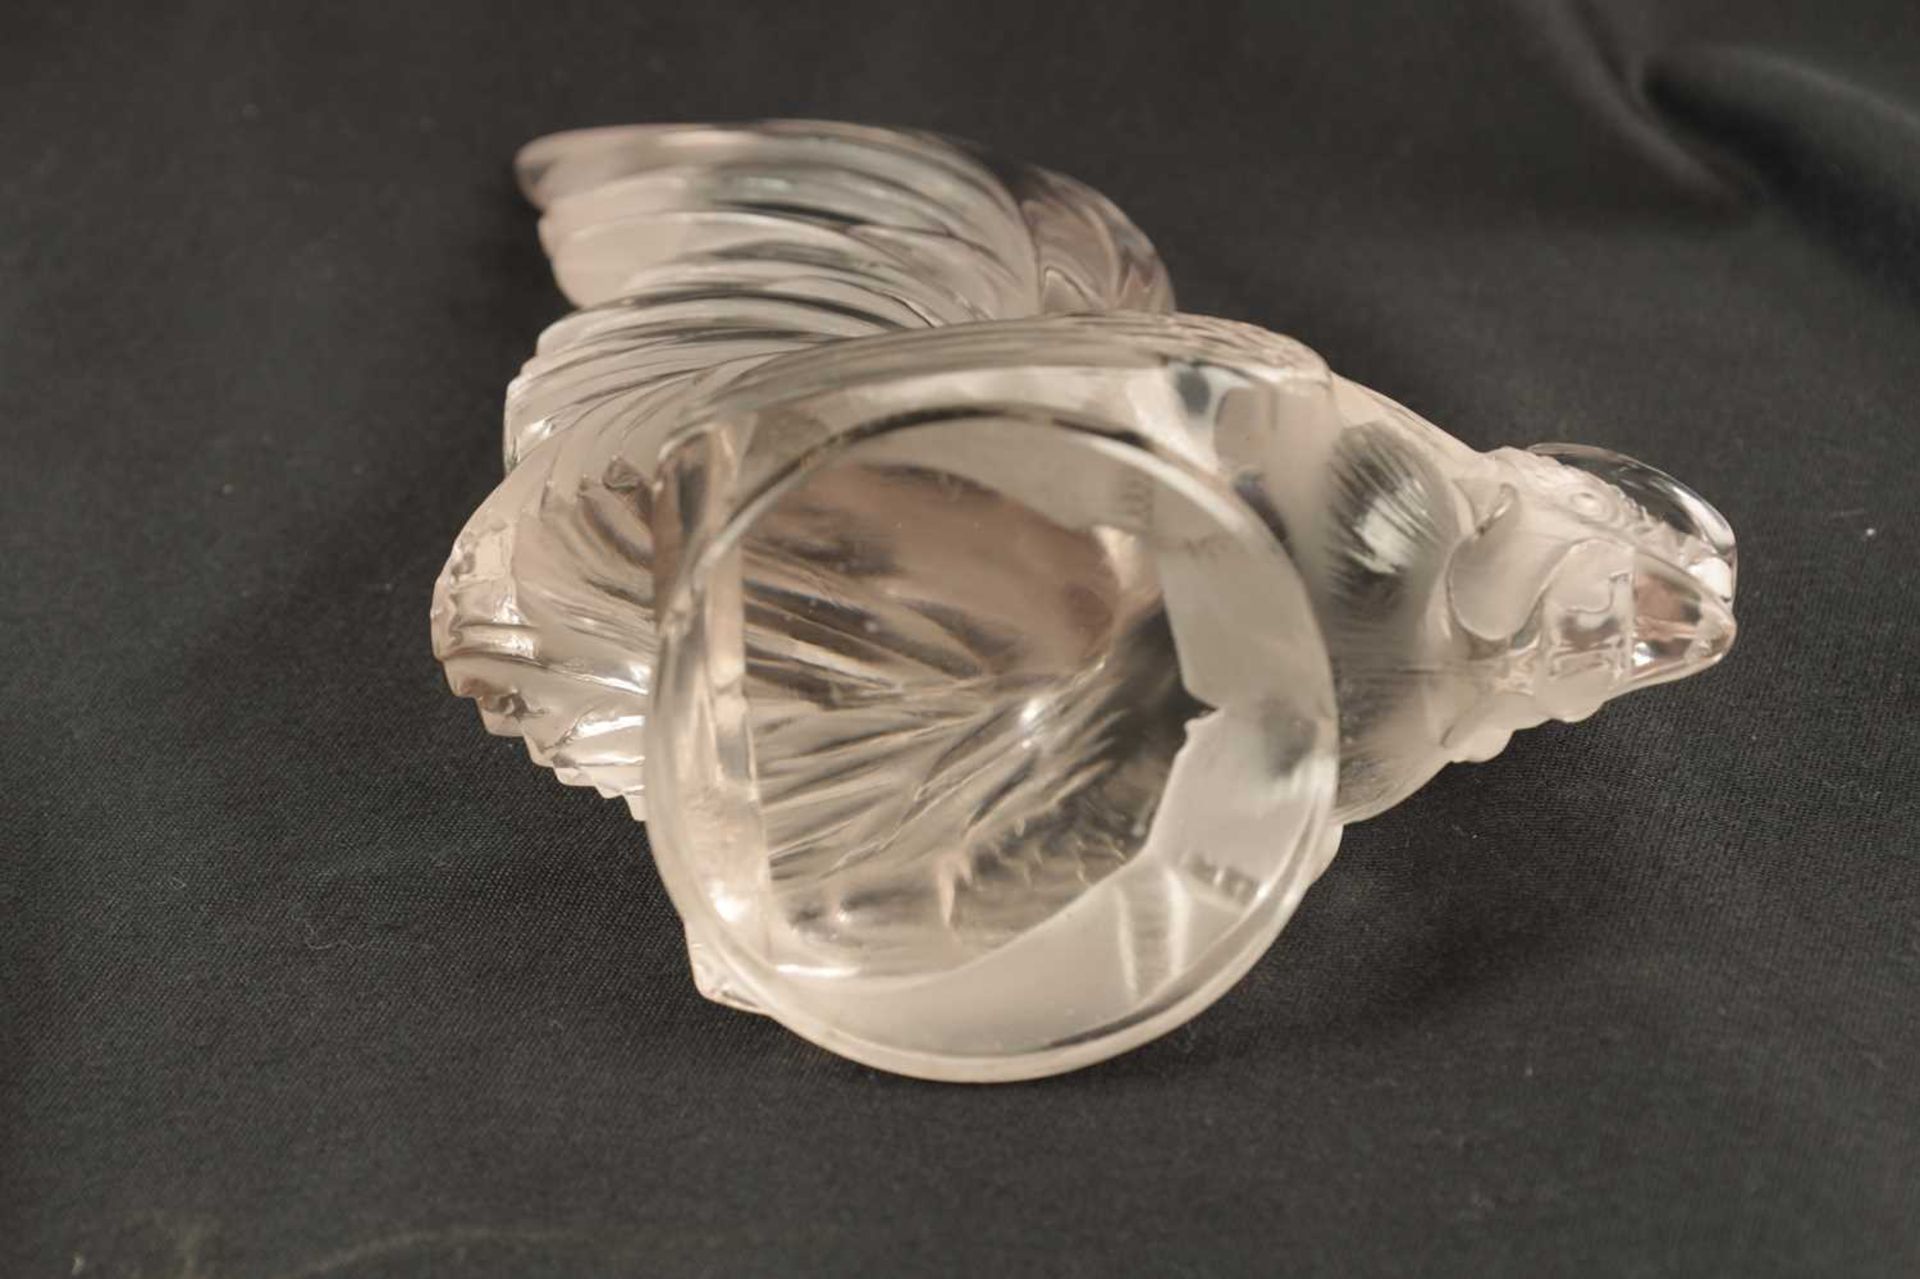 A RENE LALIQUE 'COQ NAIN' CLEAR GLASS AND FROSTED CAR MASCOT - Image 9 of 10